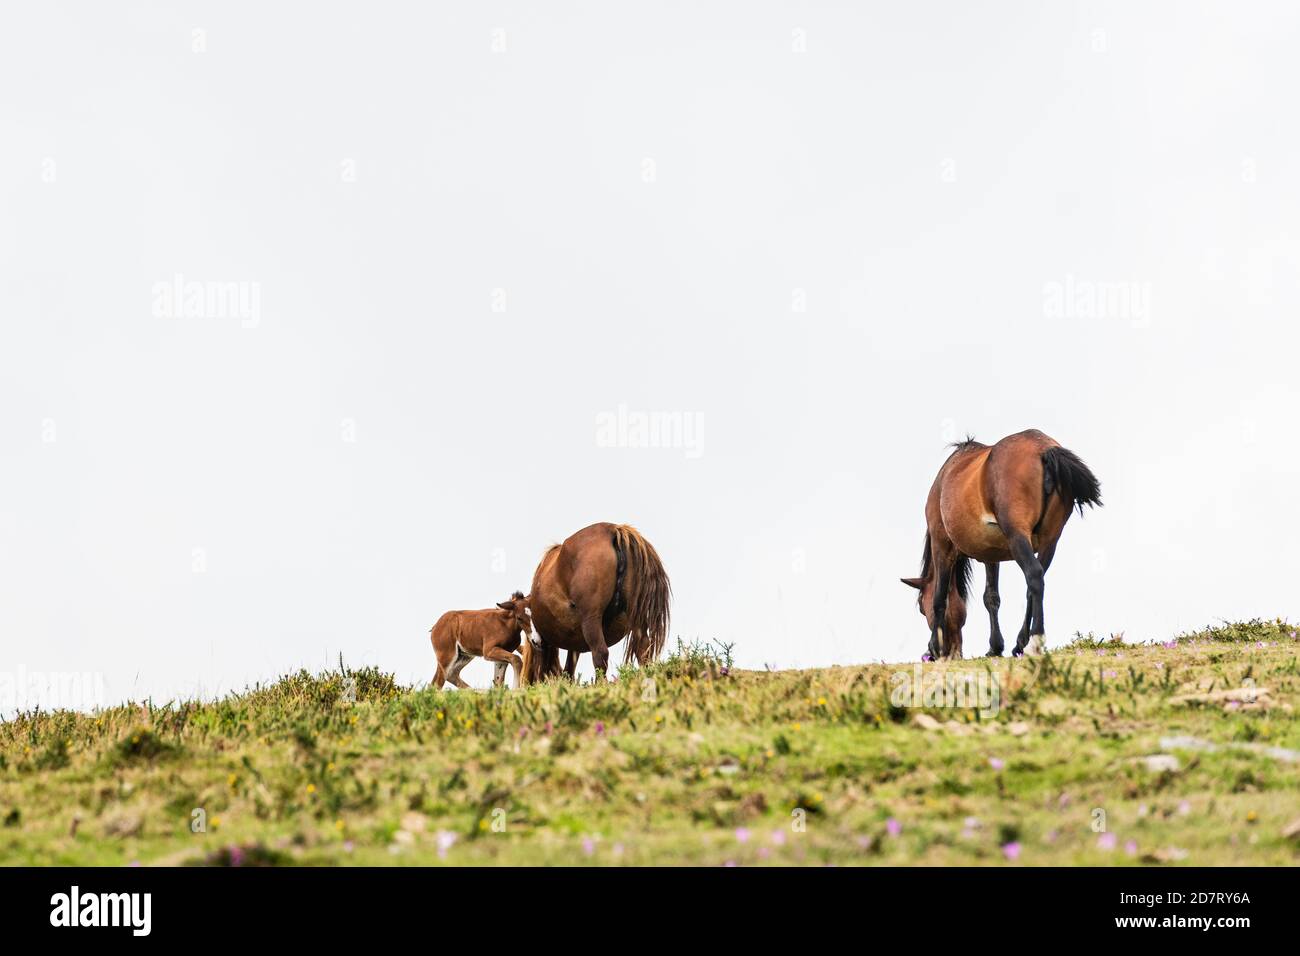 Team of wild horses and young colt eating grass in Galicia on a foggy day. Stock Photo